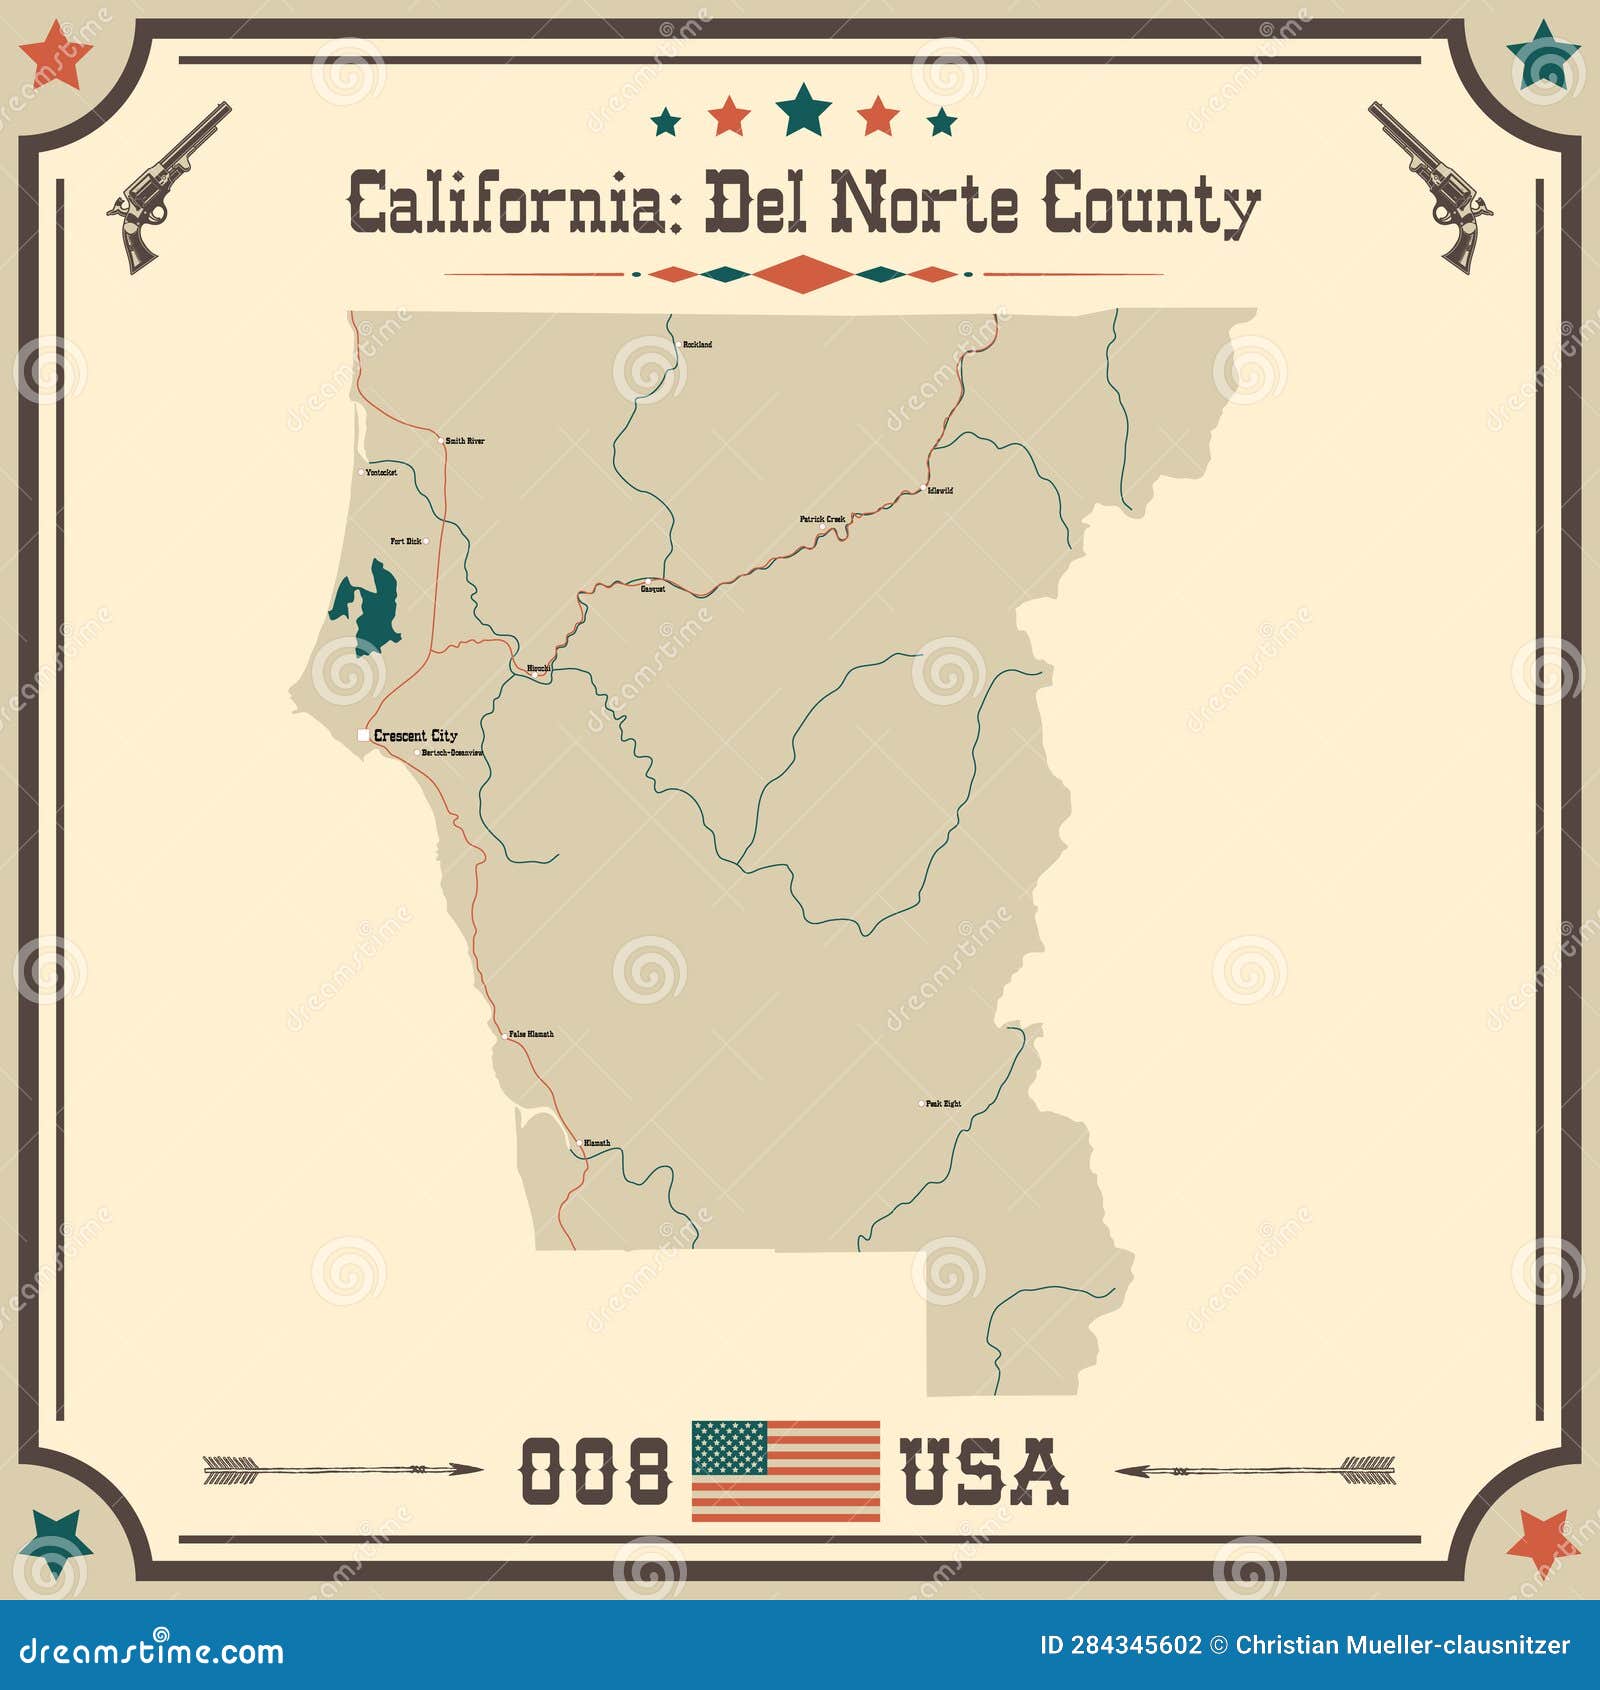 large and accurate map of del norte county, california, usa